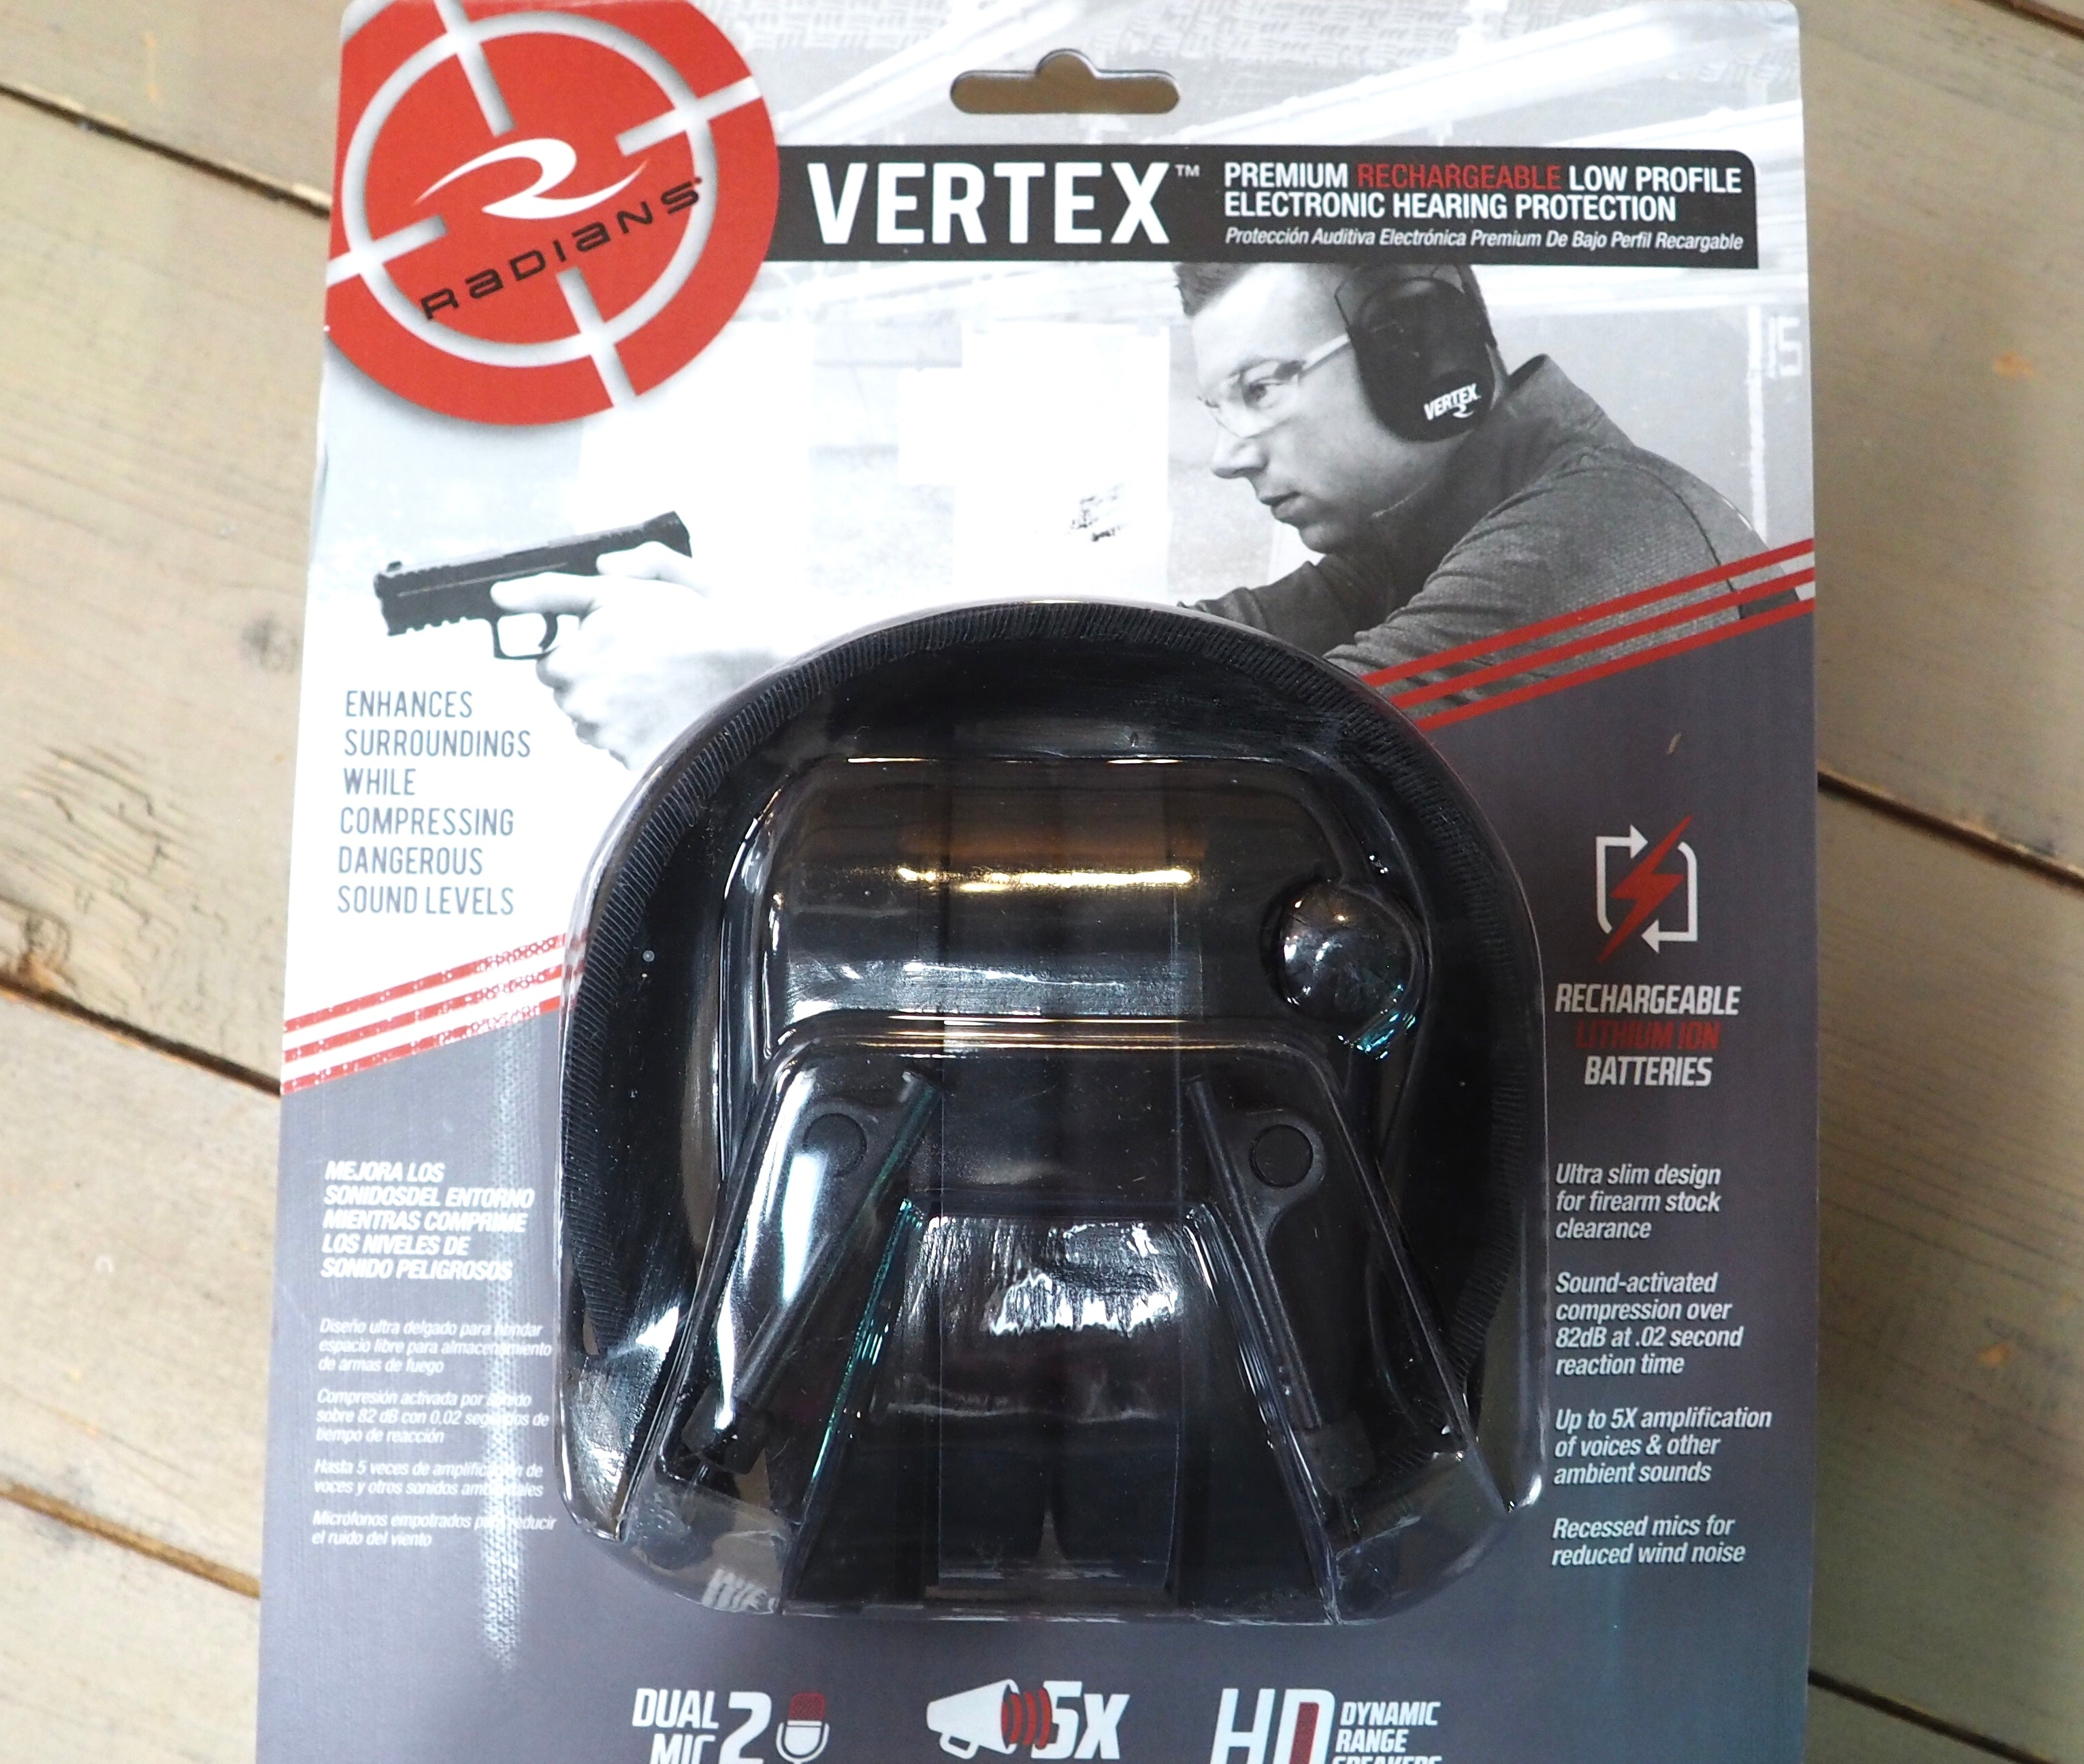 Vertex Premium Rechargeable Low Profile Electronic Hearing Protection